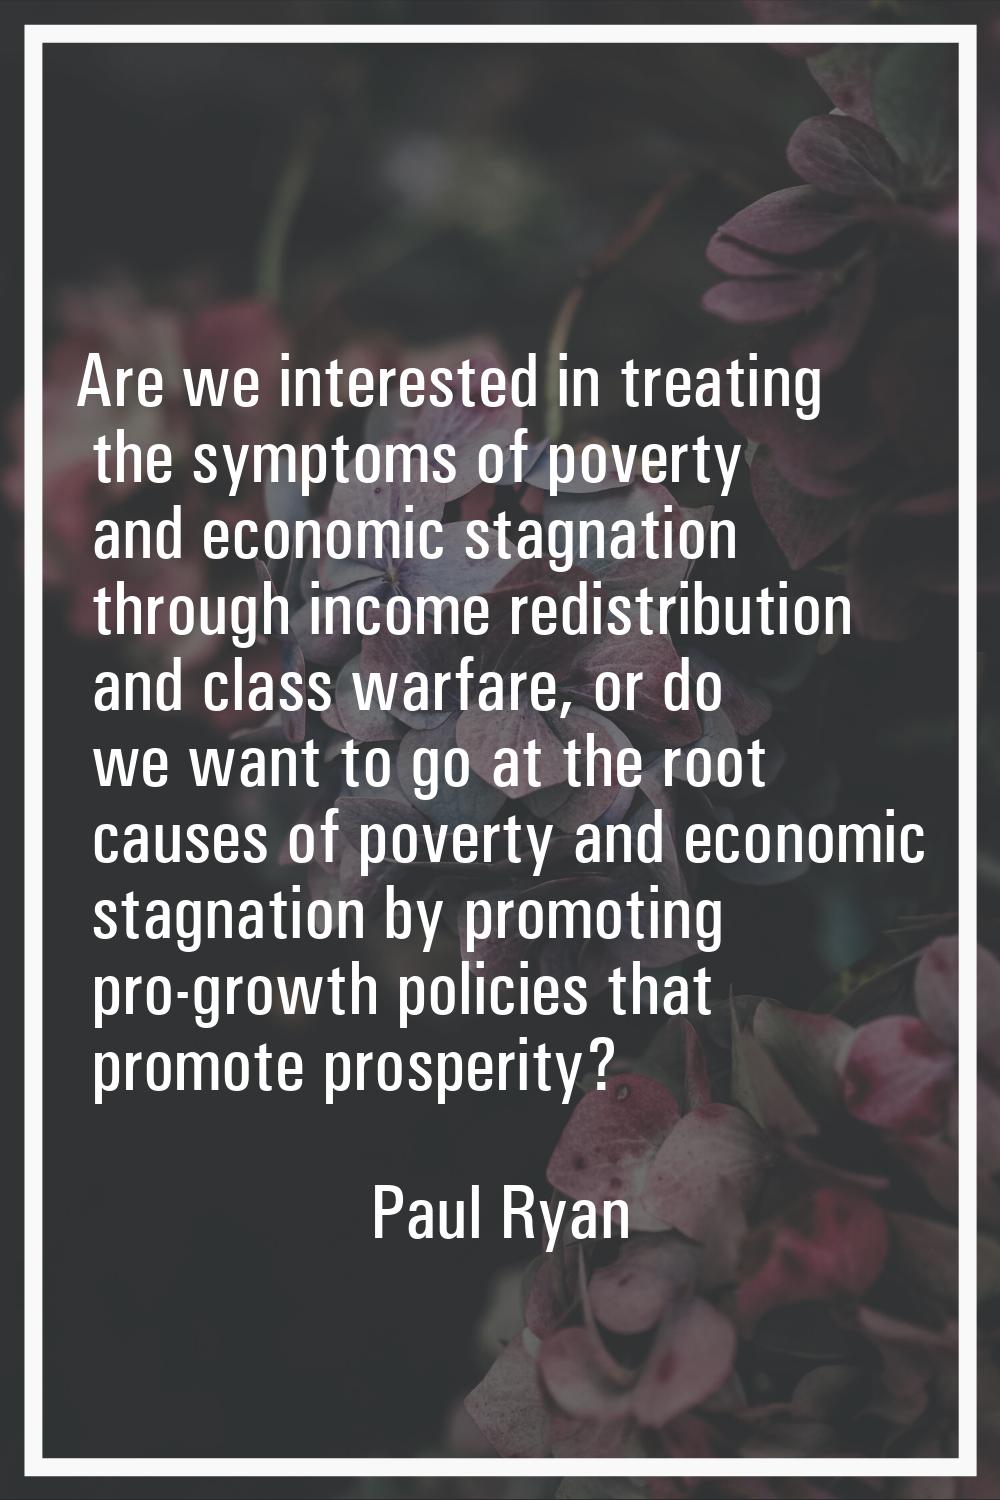 Are we interested in treating the symptoms of poverty and economic stagnation through income redist